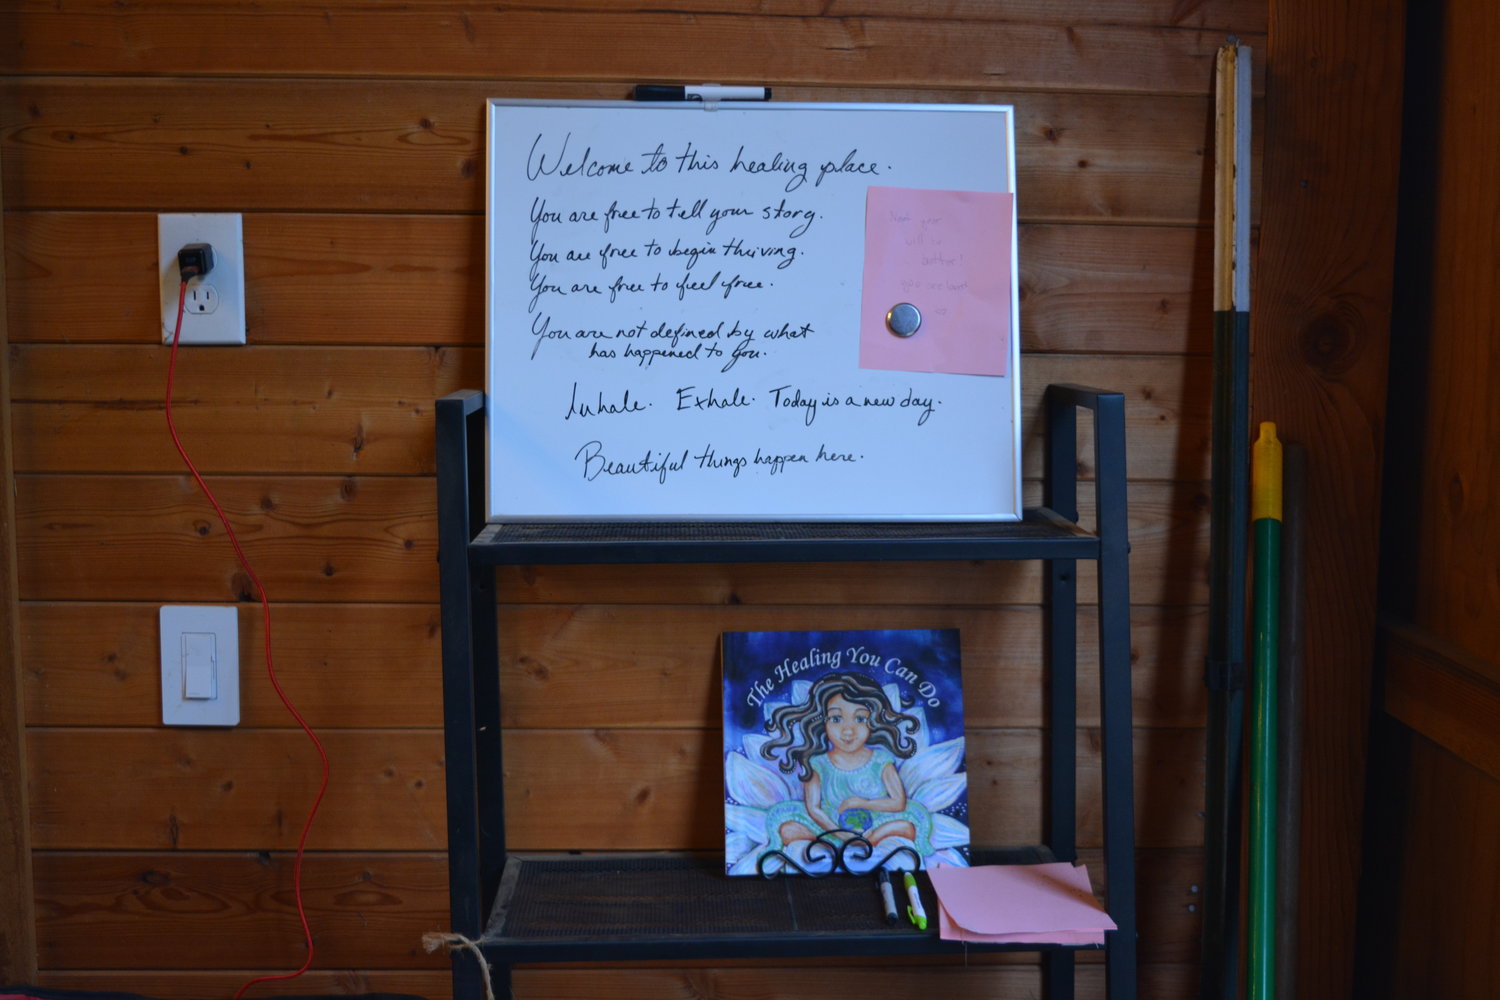 Hindi works to make the barn for the program a holistic and welcoming space for all. Prior attendees write notes to the next person as a therapeutic “pay it forward” experience.